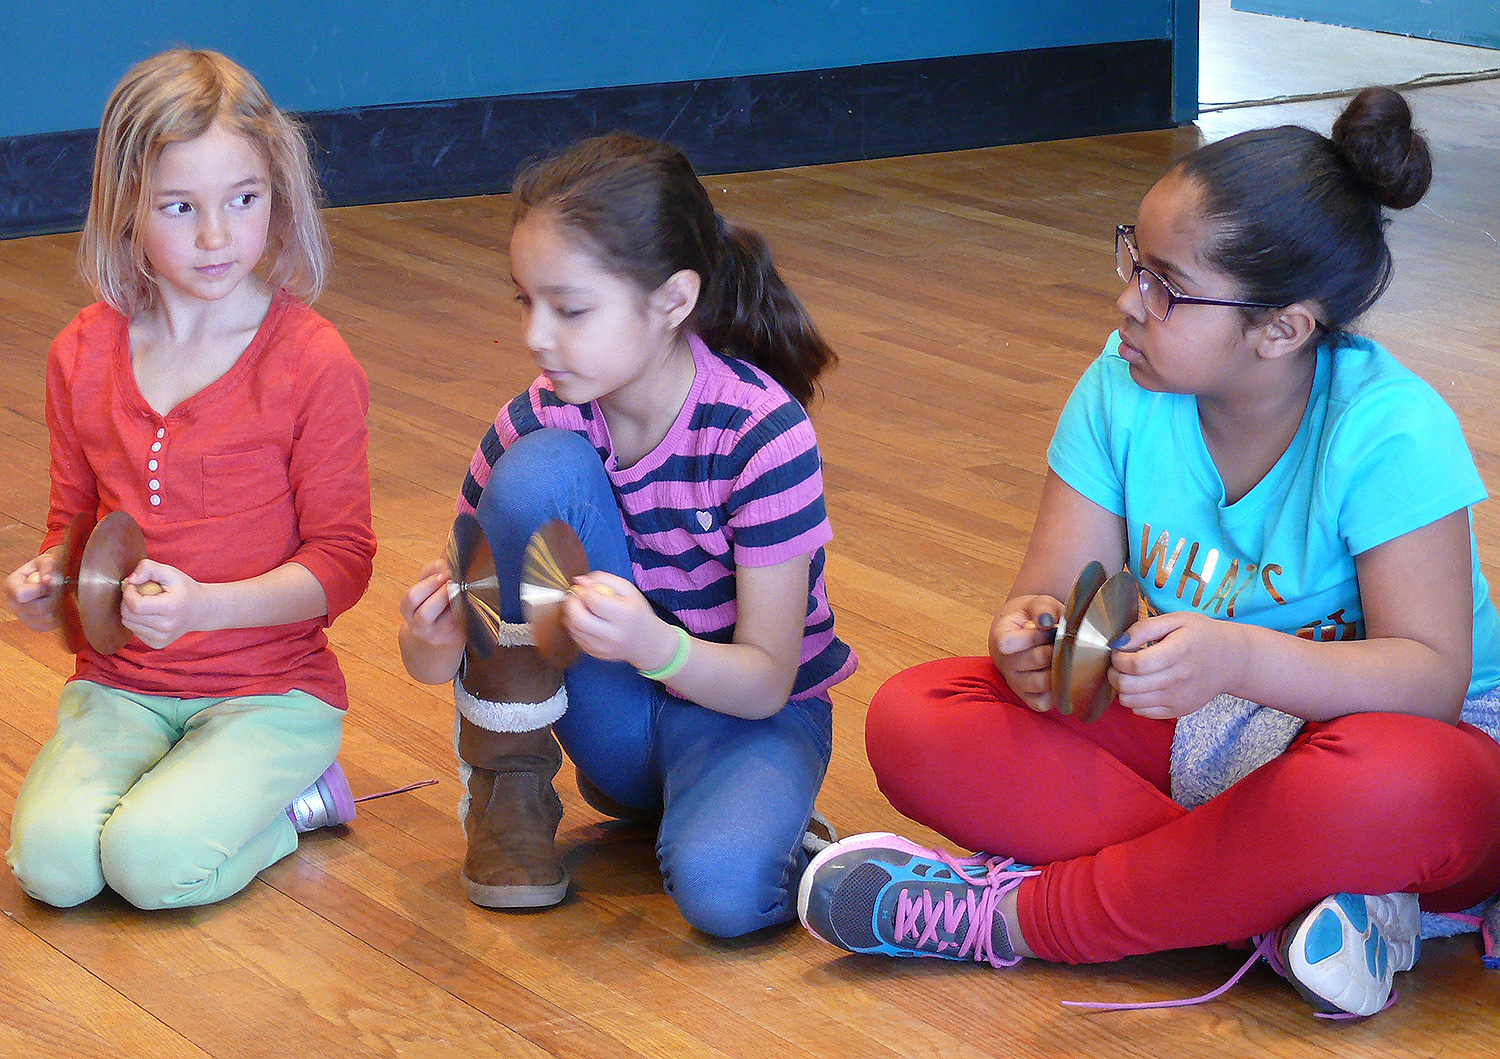 For many of the students, it was their first introduction to music theory and the complex layers of participation involved in creating an ensemble. The children began by learning about basic note values, such as the difference between a whole note and a half note, then moved into practicing rhythmic pattern exchanges, and ended by performing together as a percussion band.